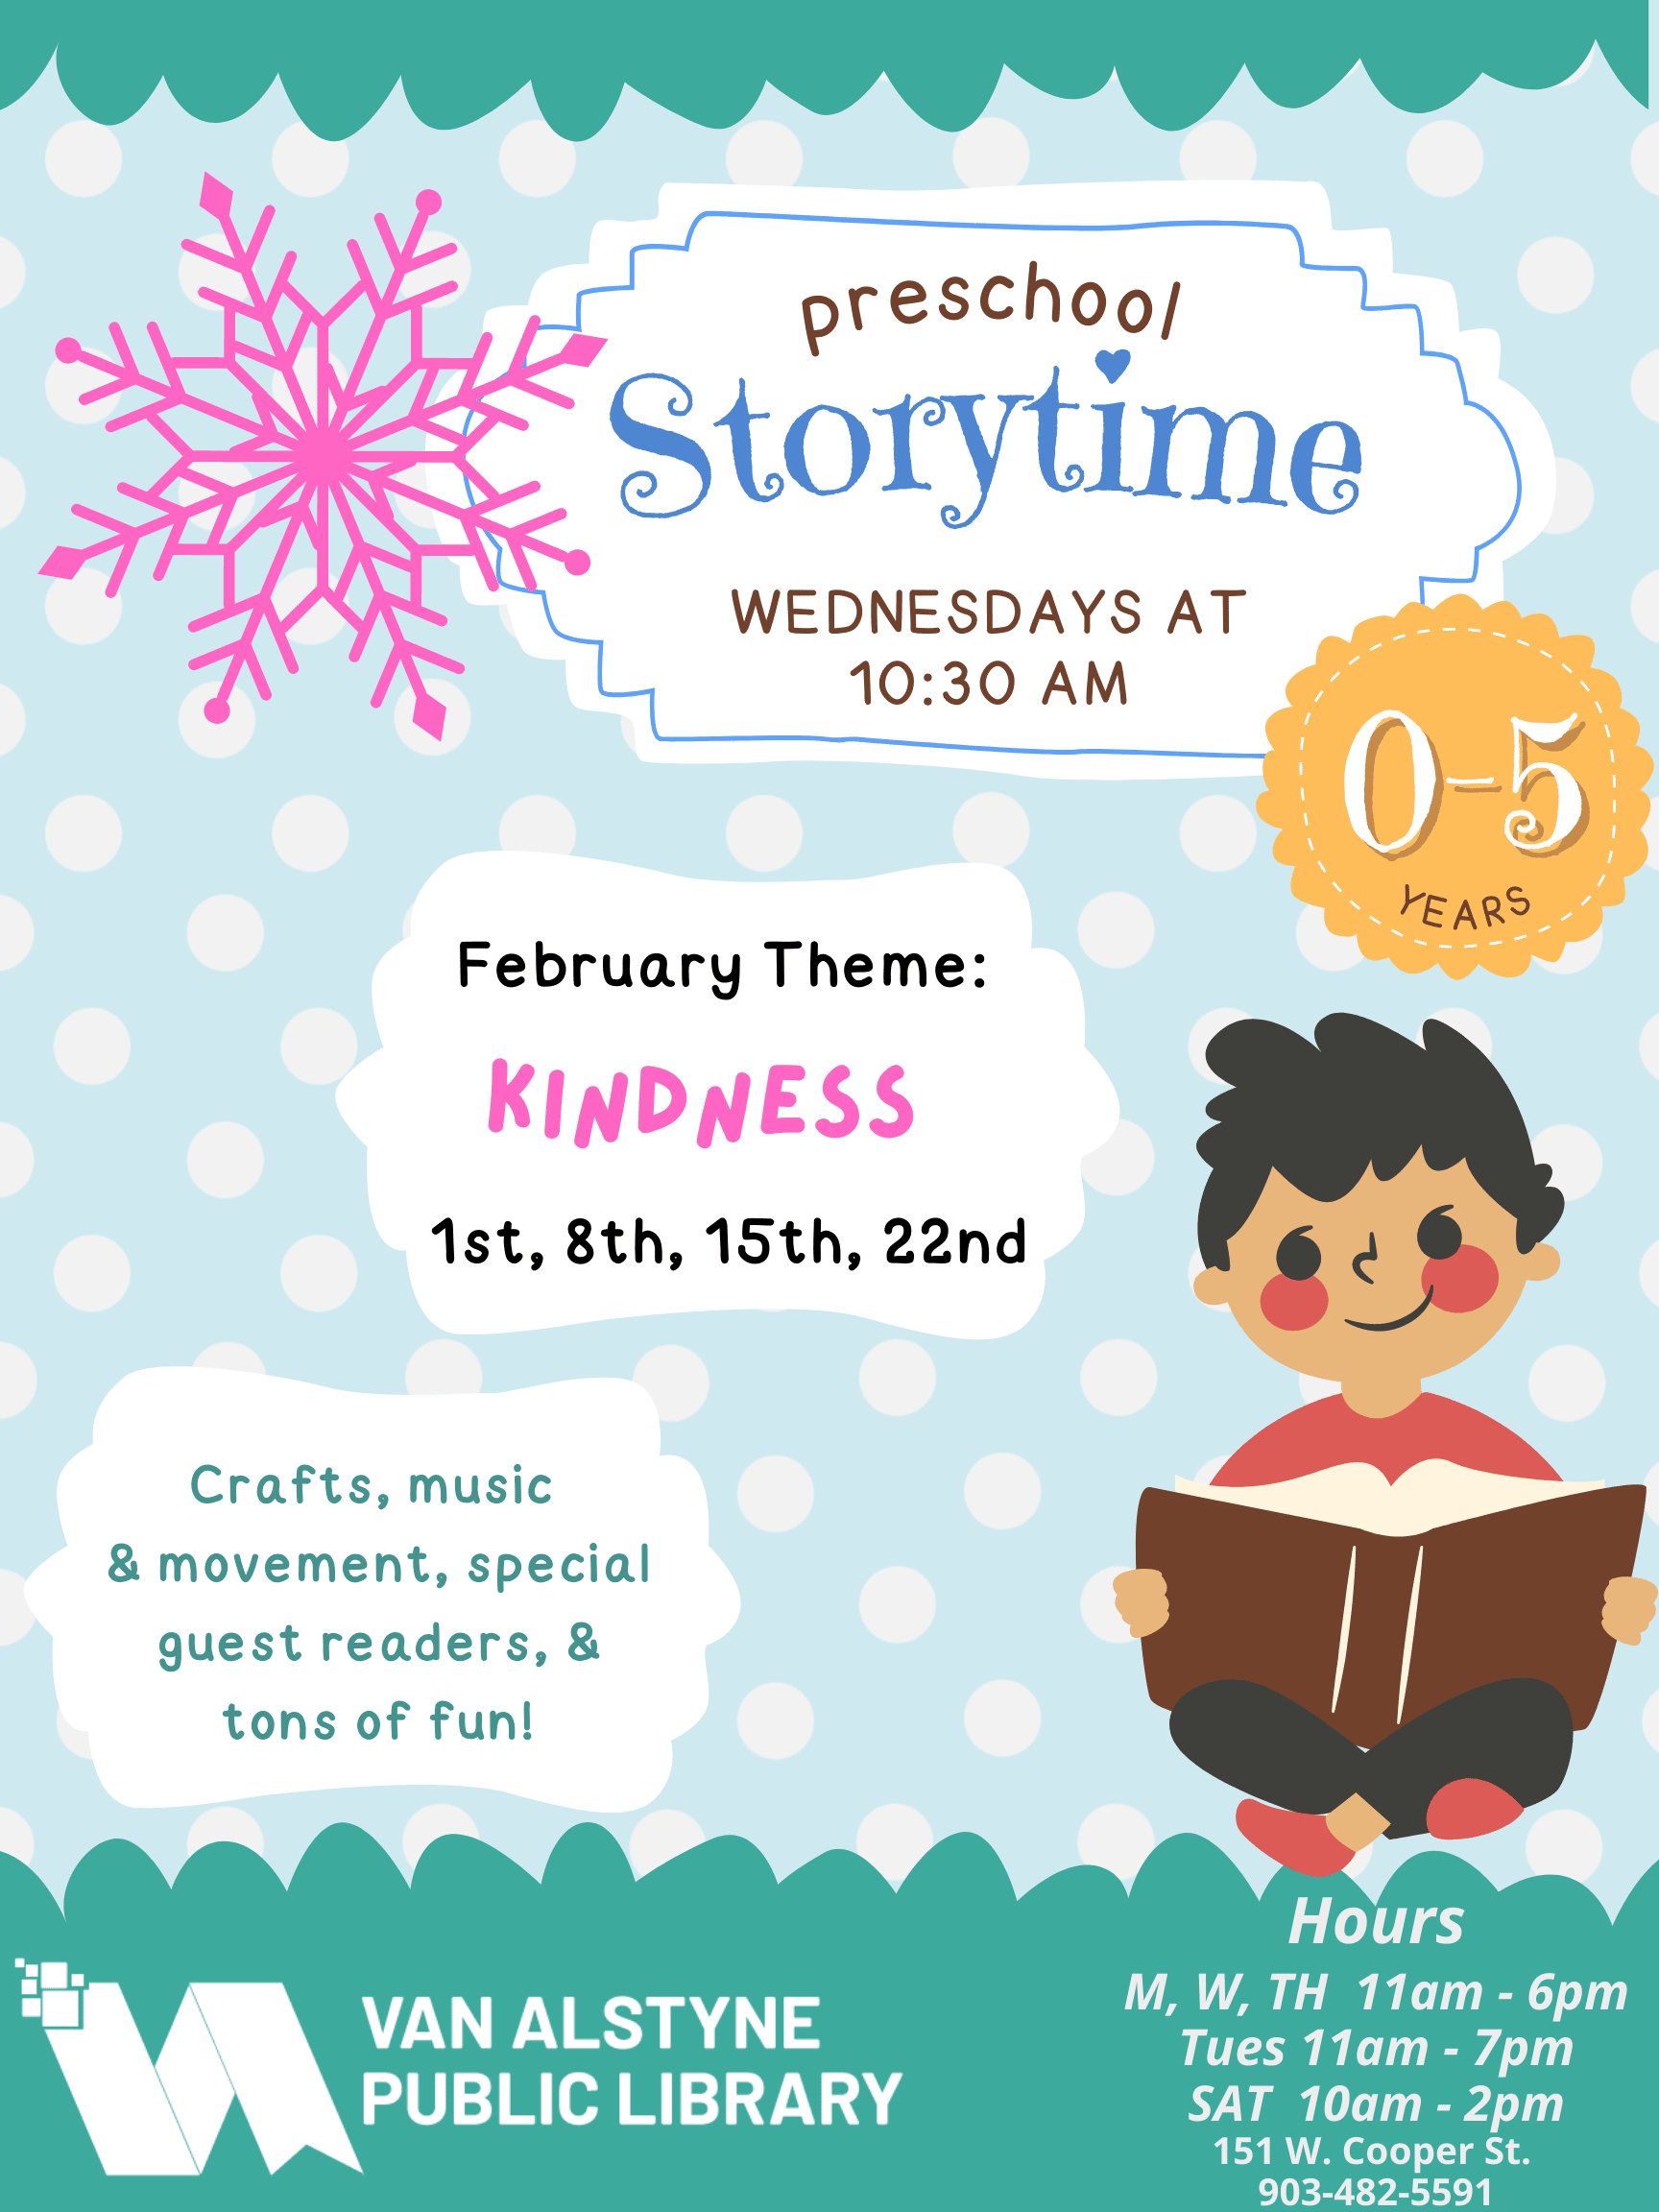 Story Time at the Library Wednesday 10:30am